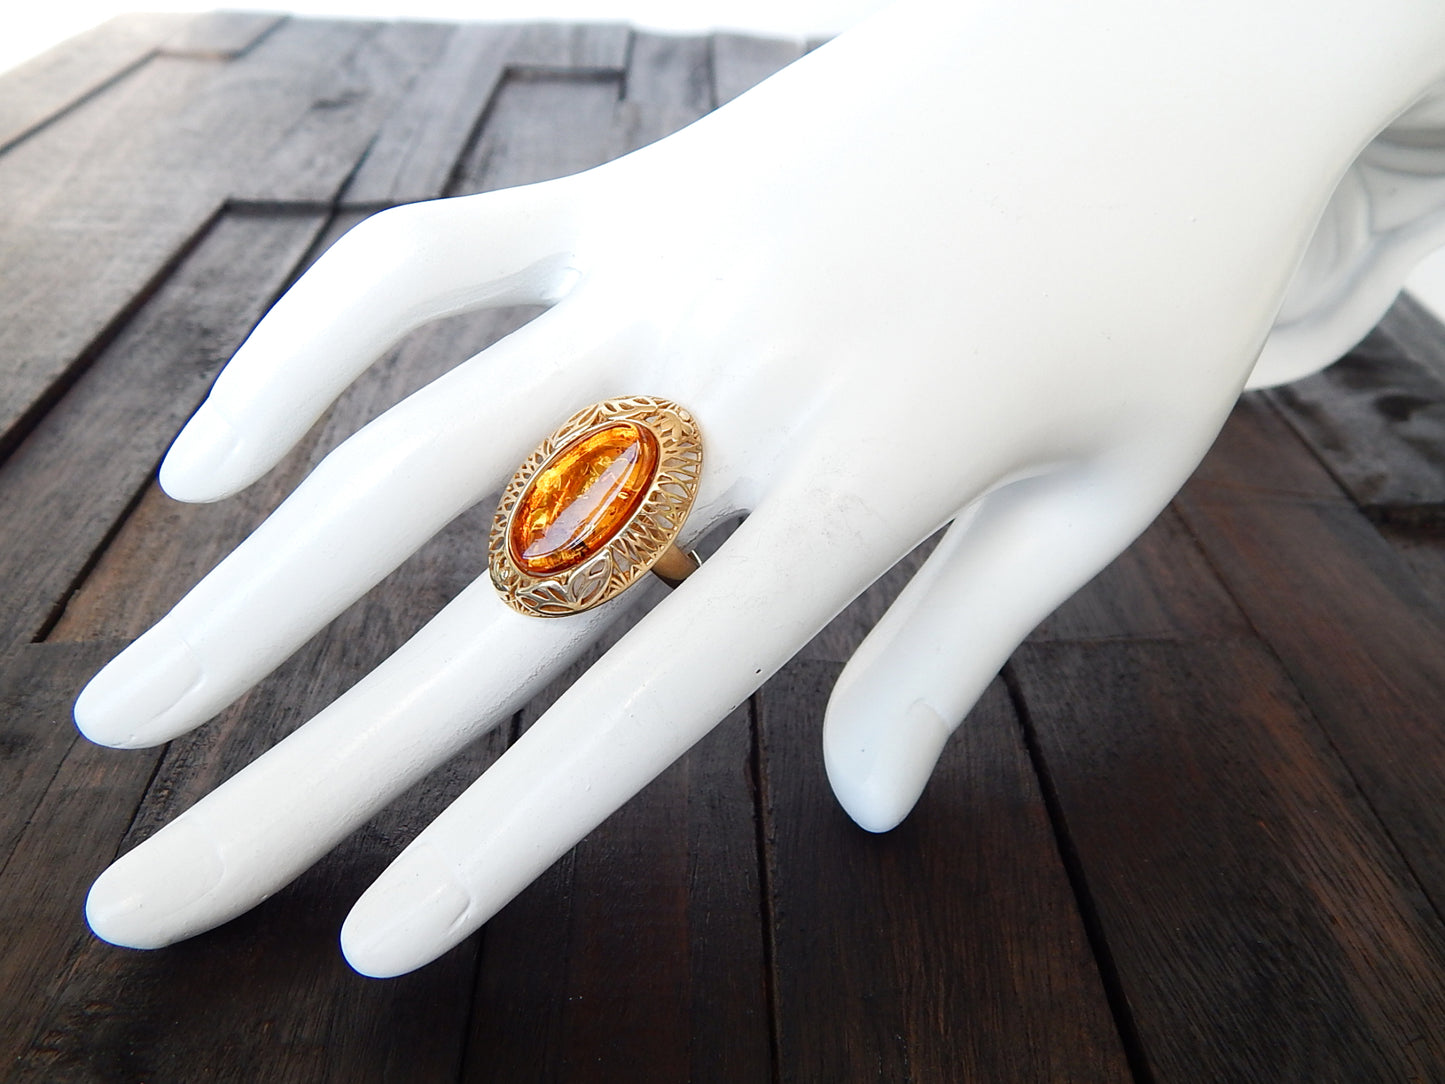 Natural Baltic Cognac Amber 14K Gold Plated Queens Adjustable Ring